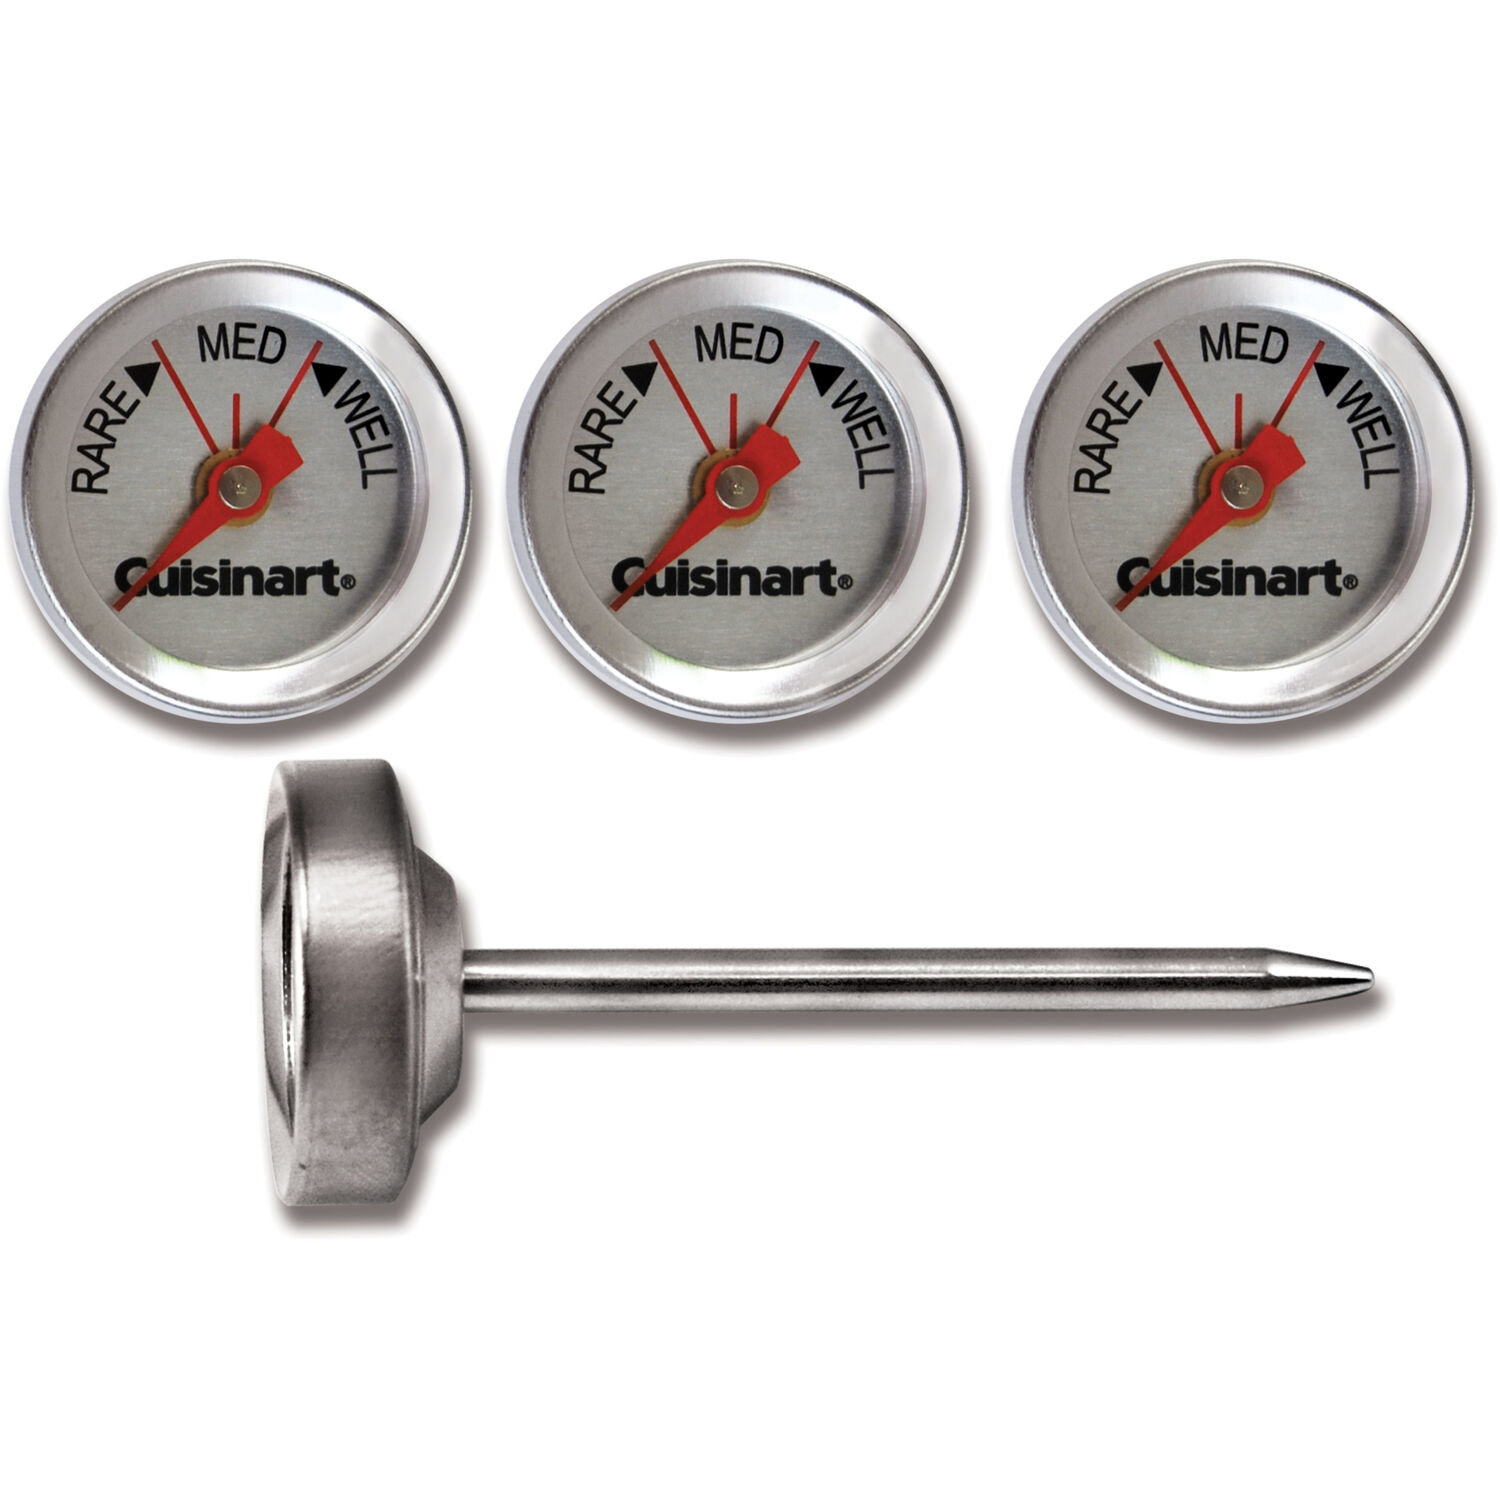 4-pack Cuisinart Outdoor Grilling Steak Thermometers $6.85 at Walmart